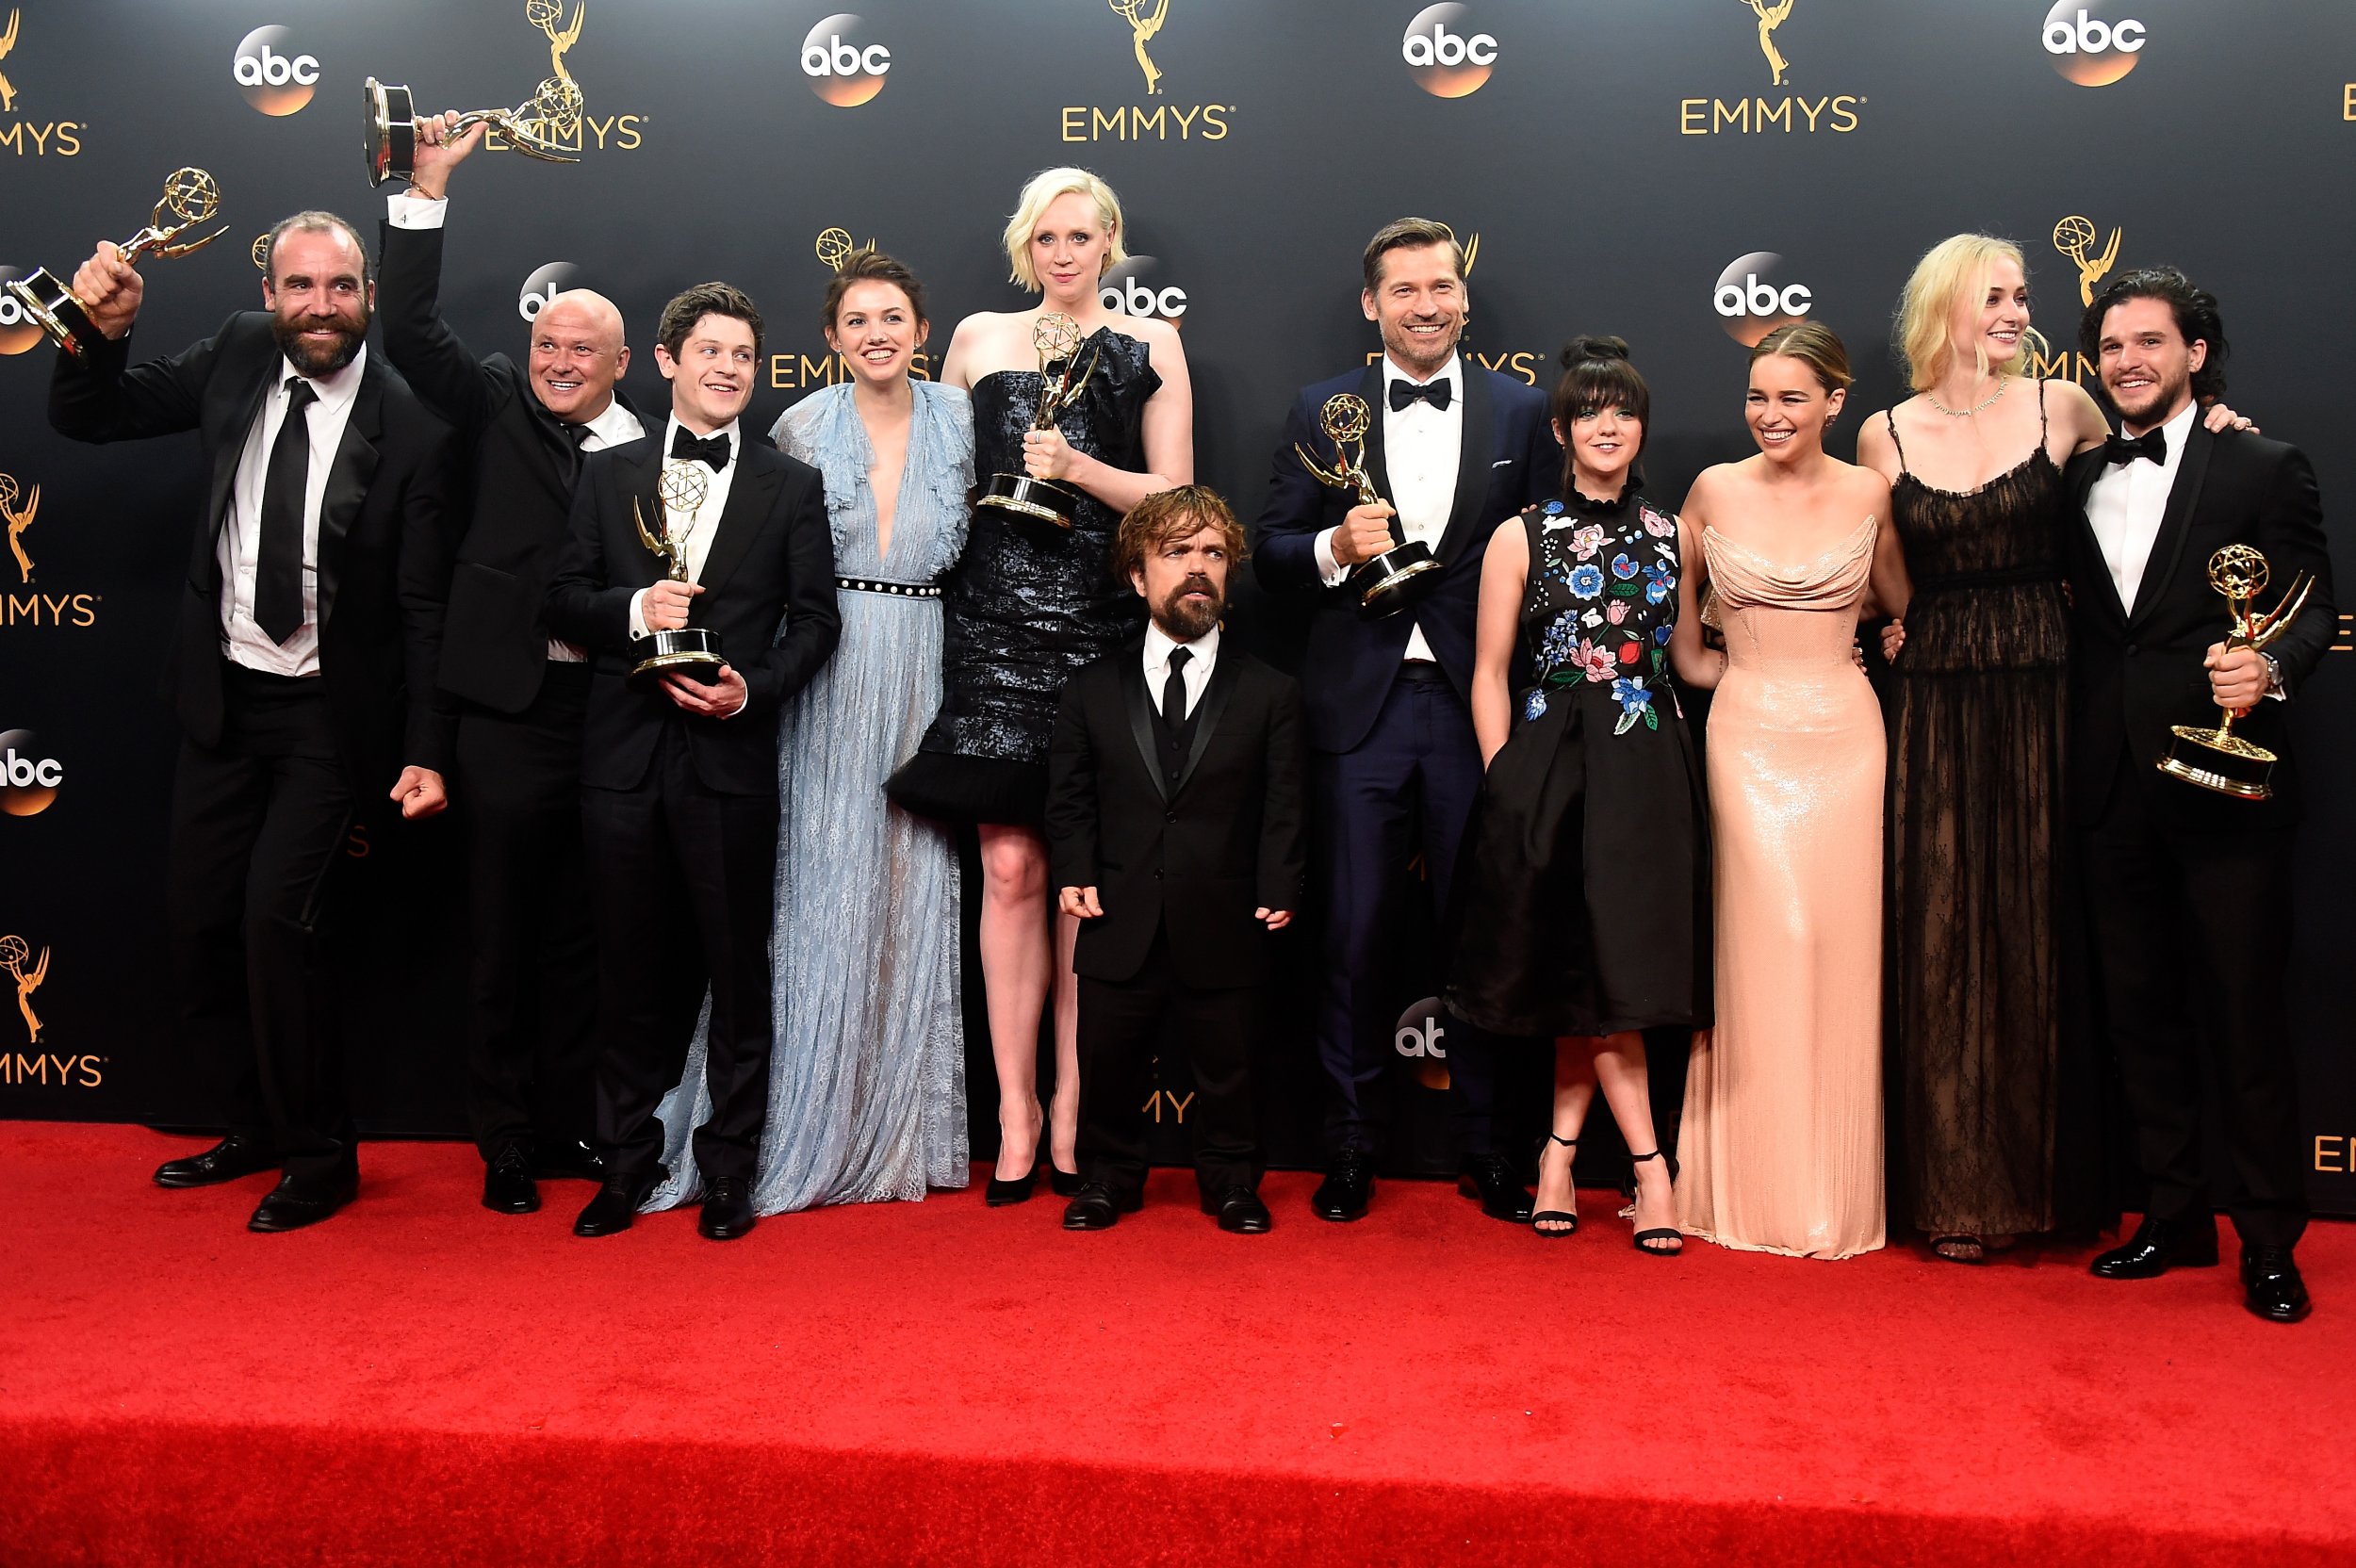 Game of Thrones cast at 2016 Emmy Awards